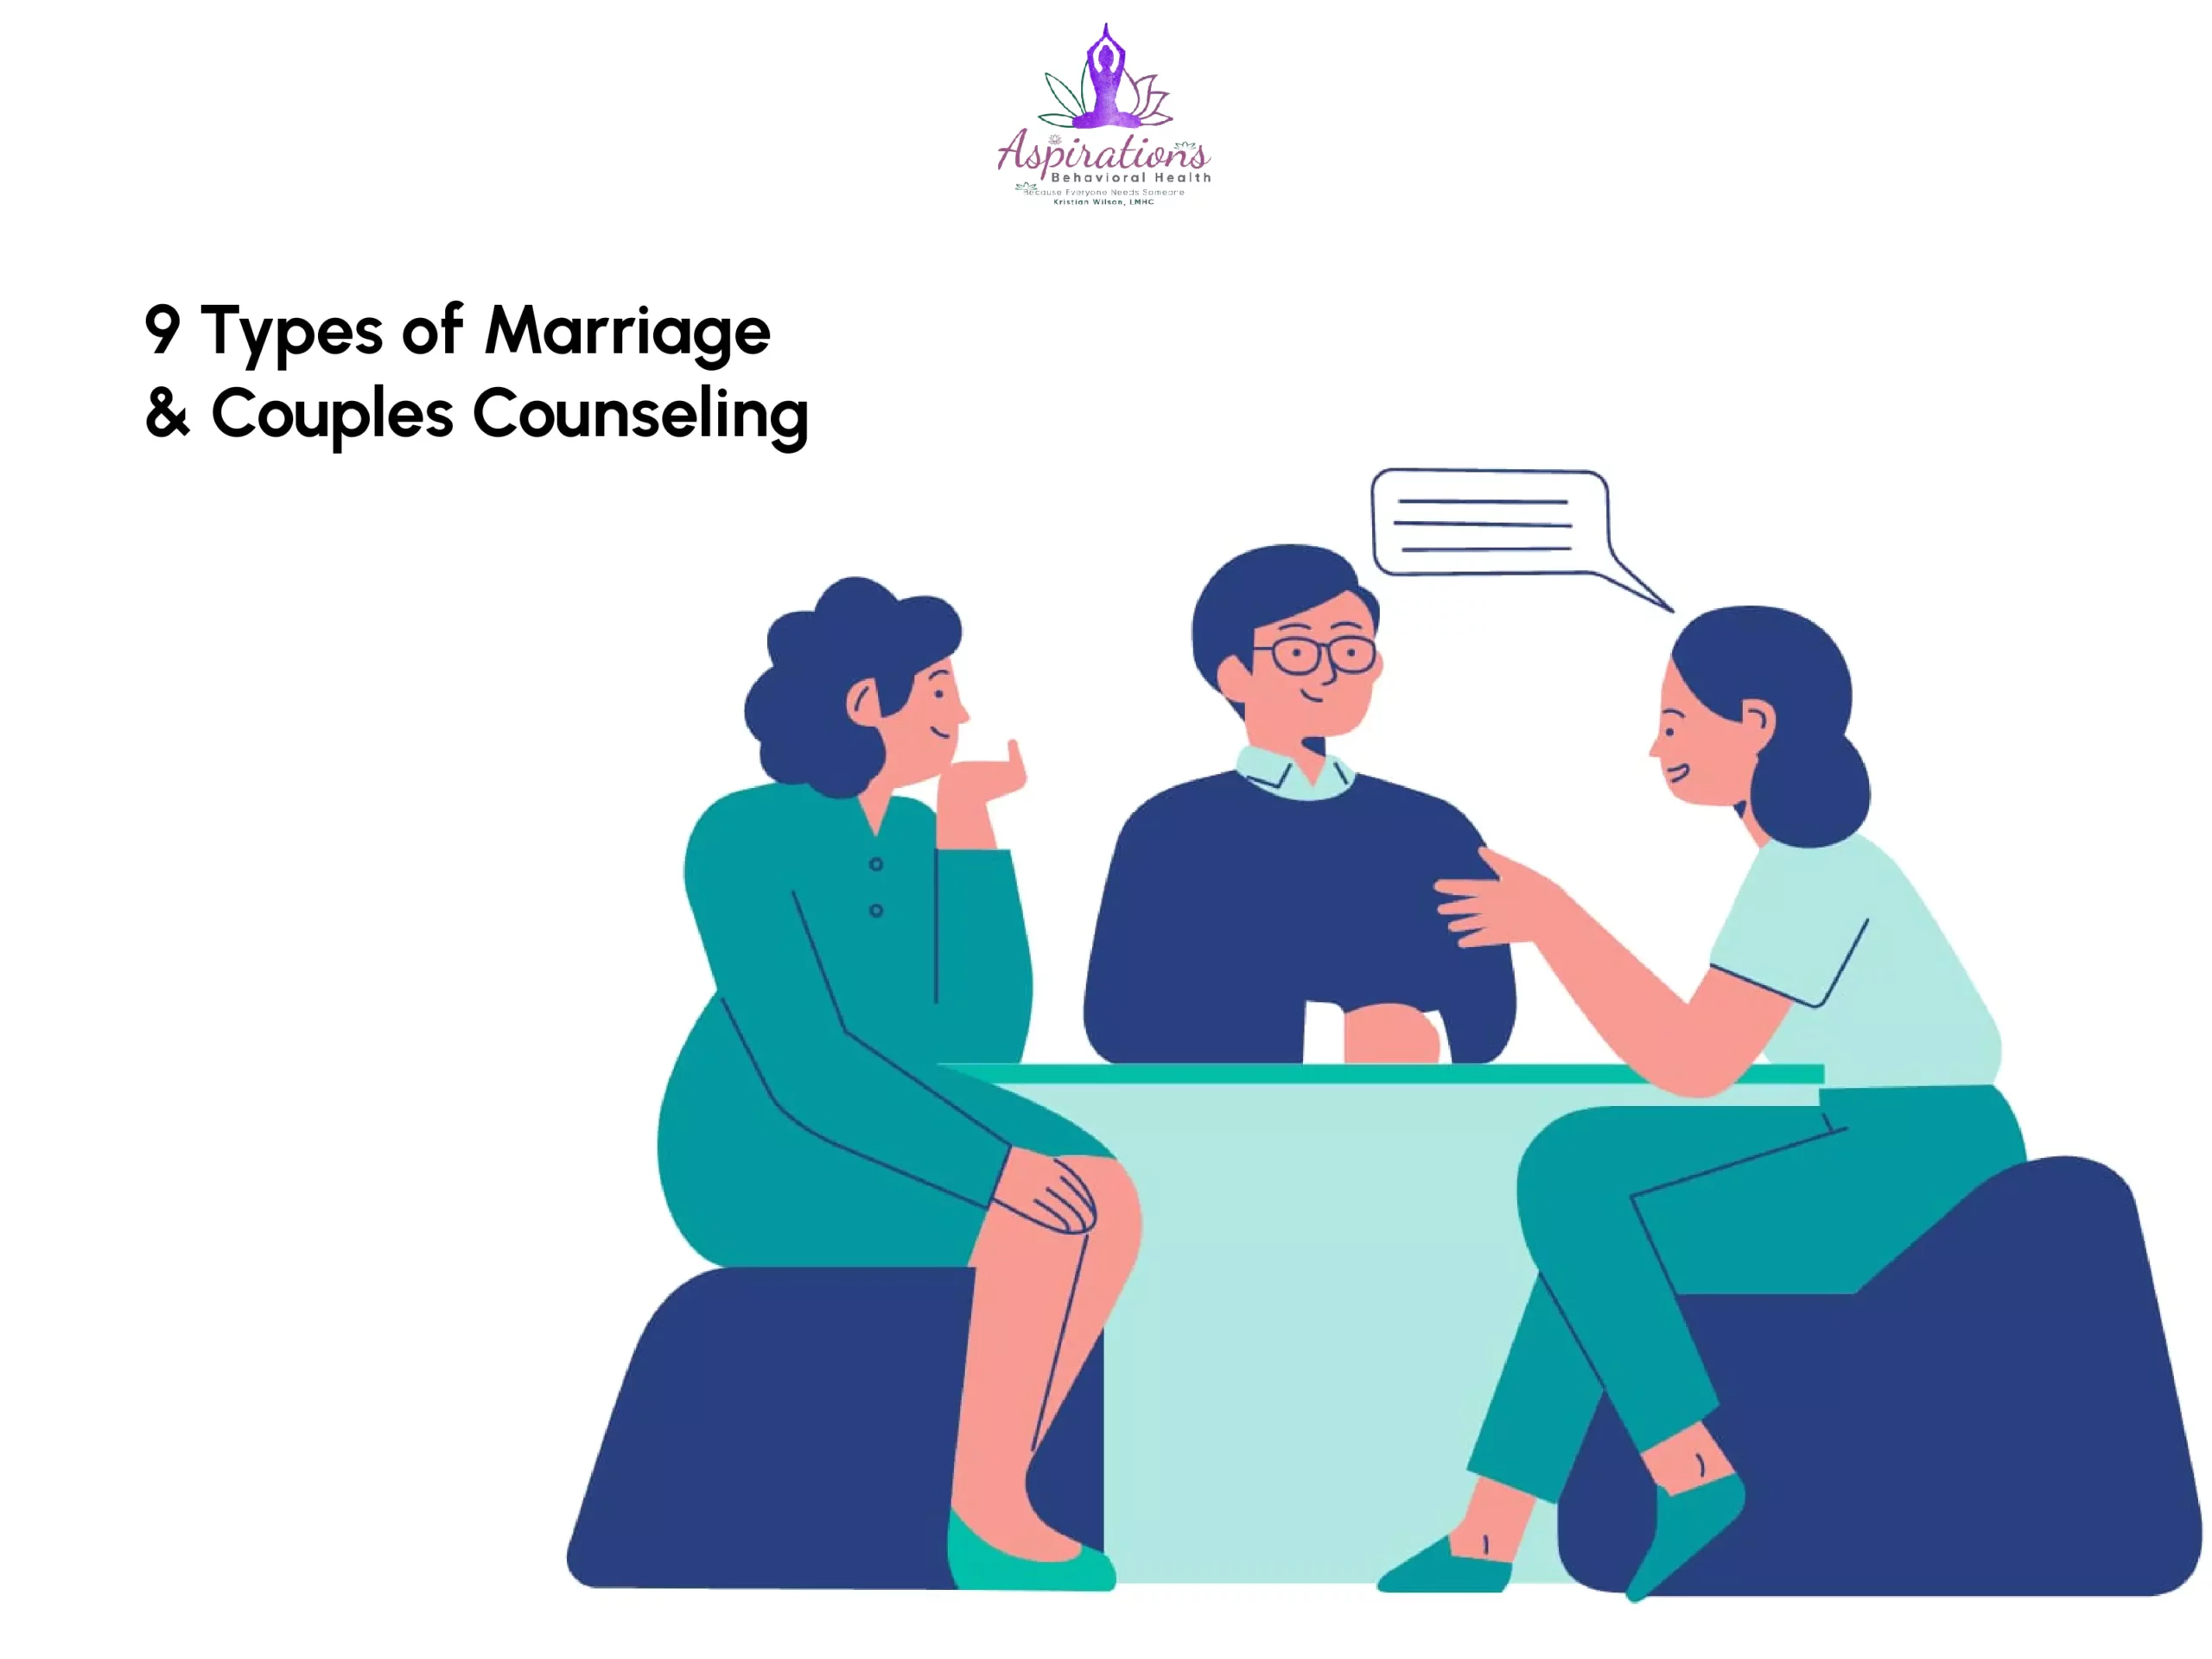 9 Types of Marriage & Couples Counseling